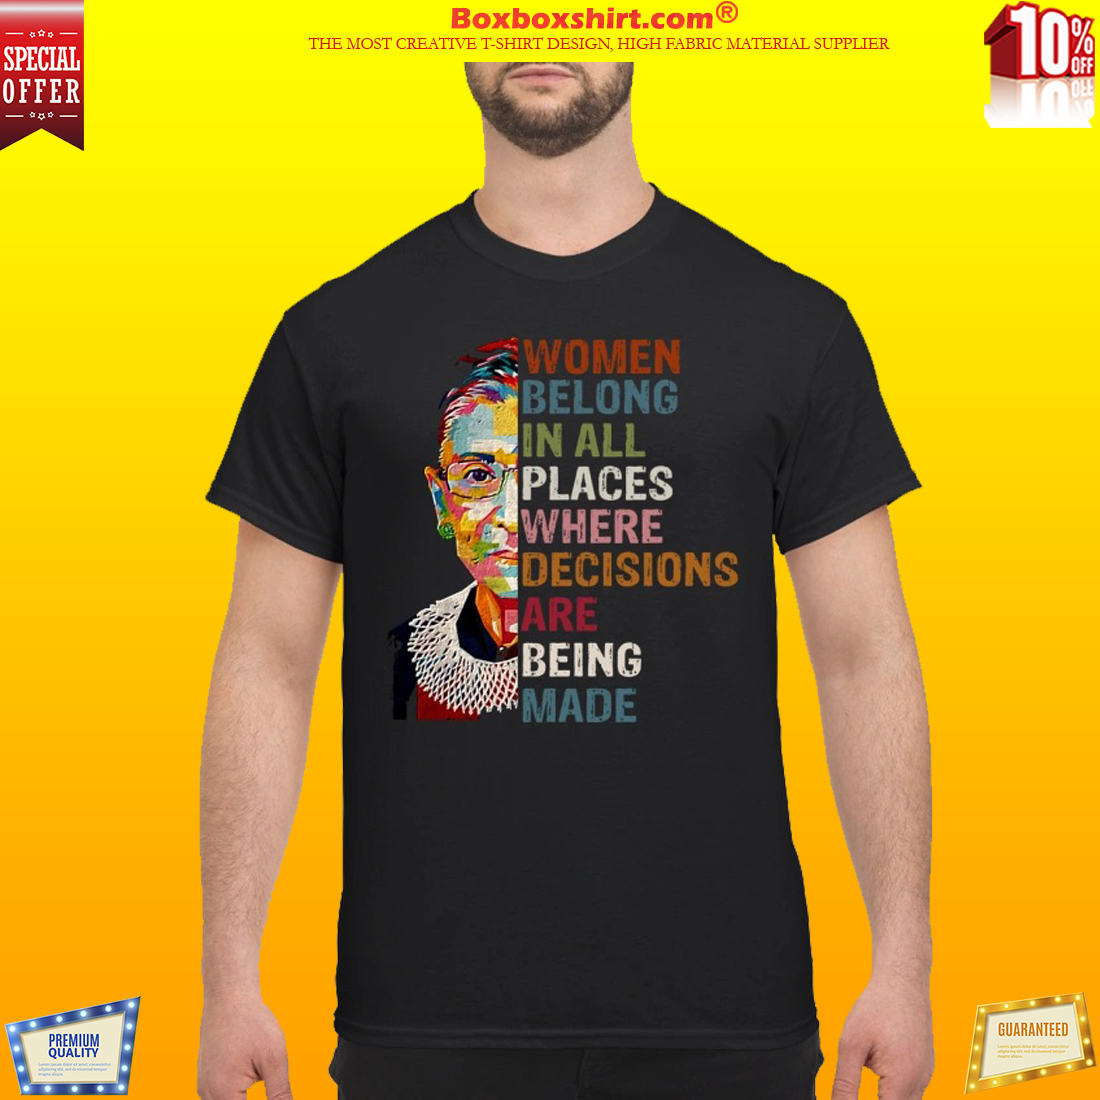 Justice Ginsburg Women belong in all places where decisions are being made classic shirt